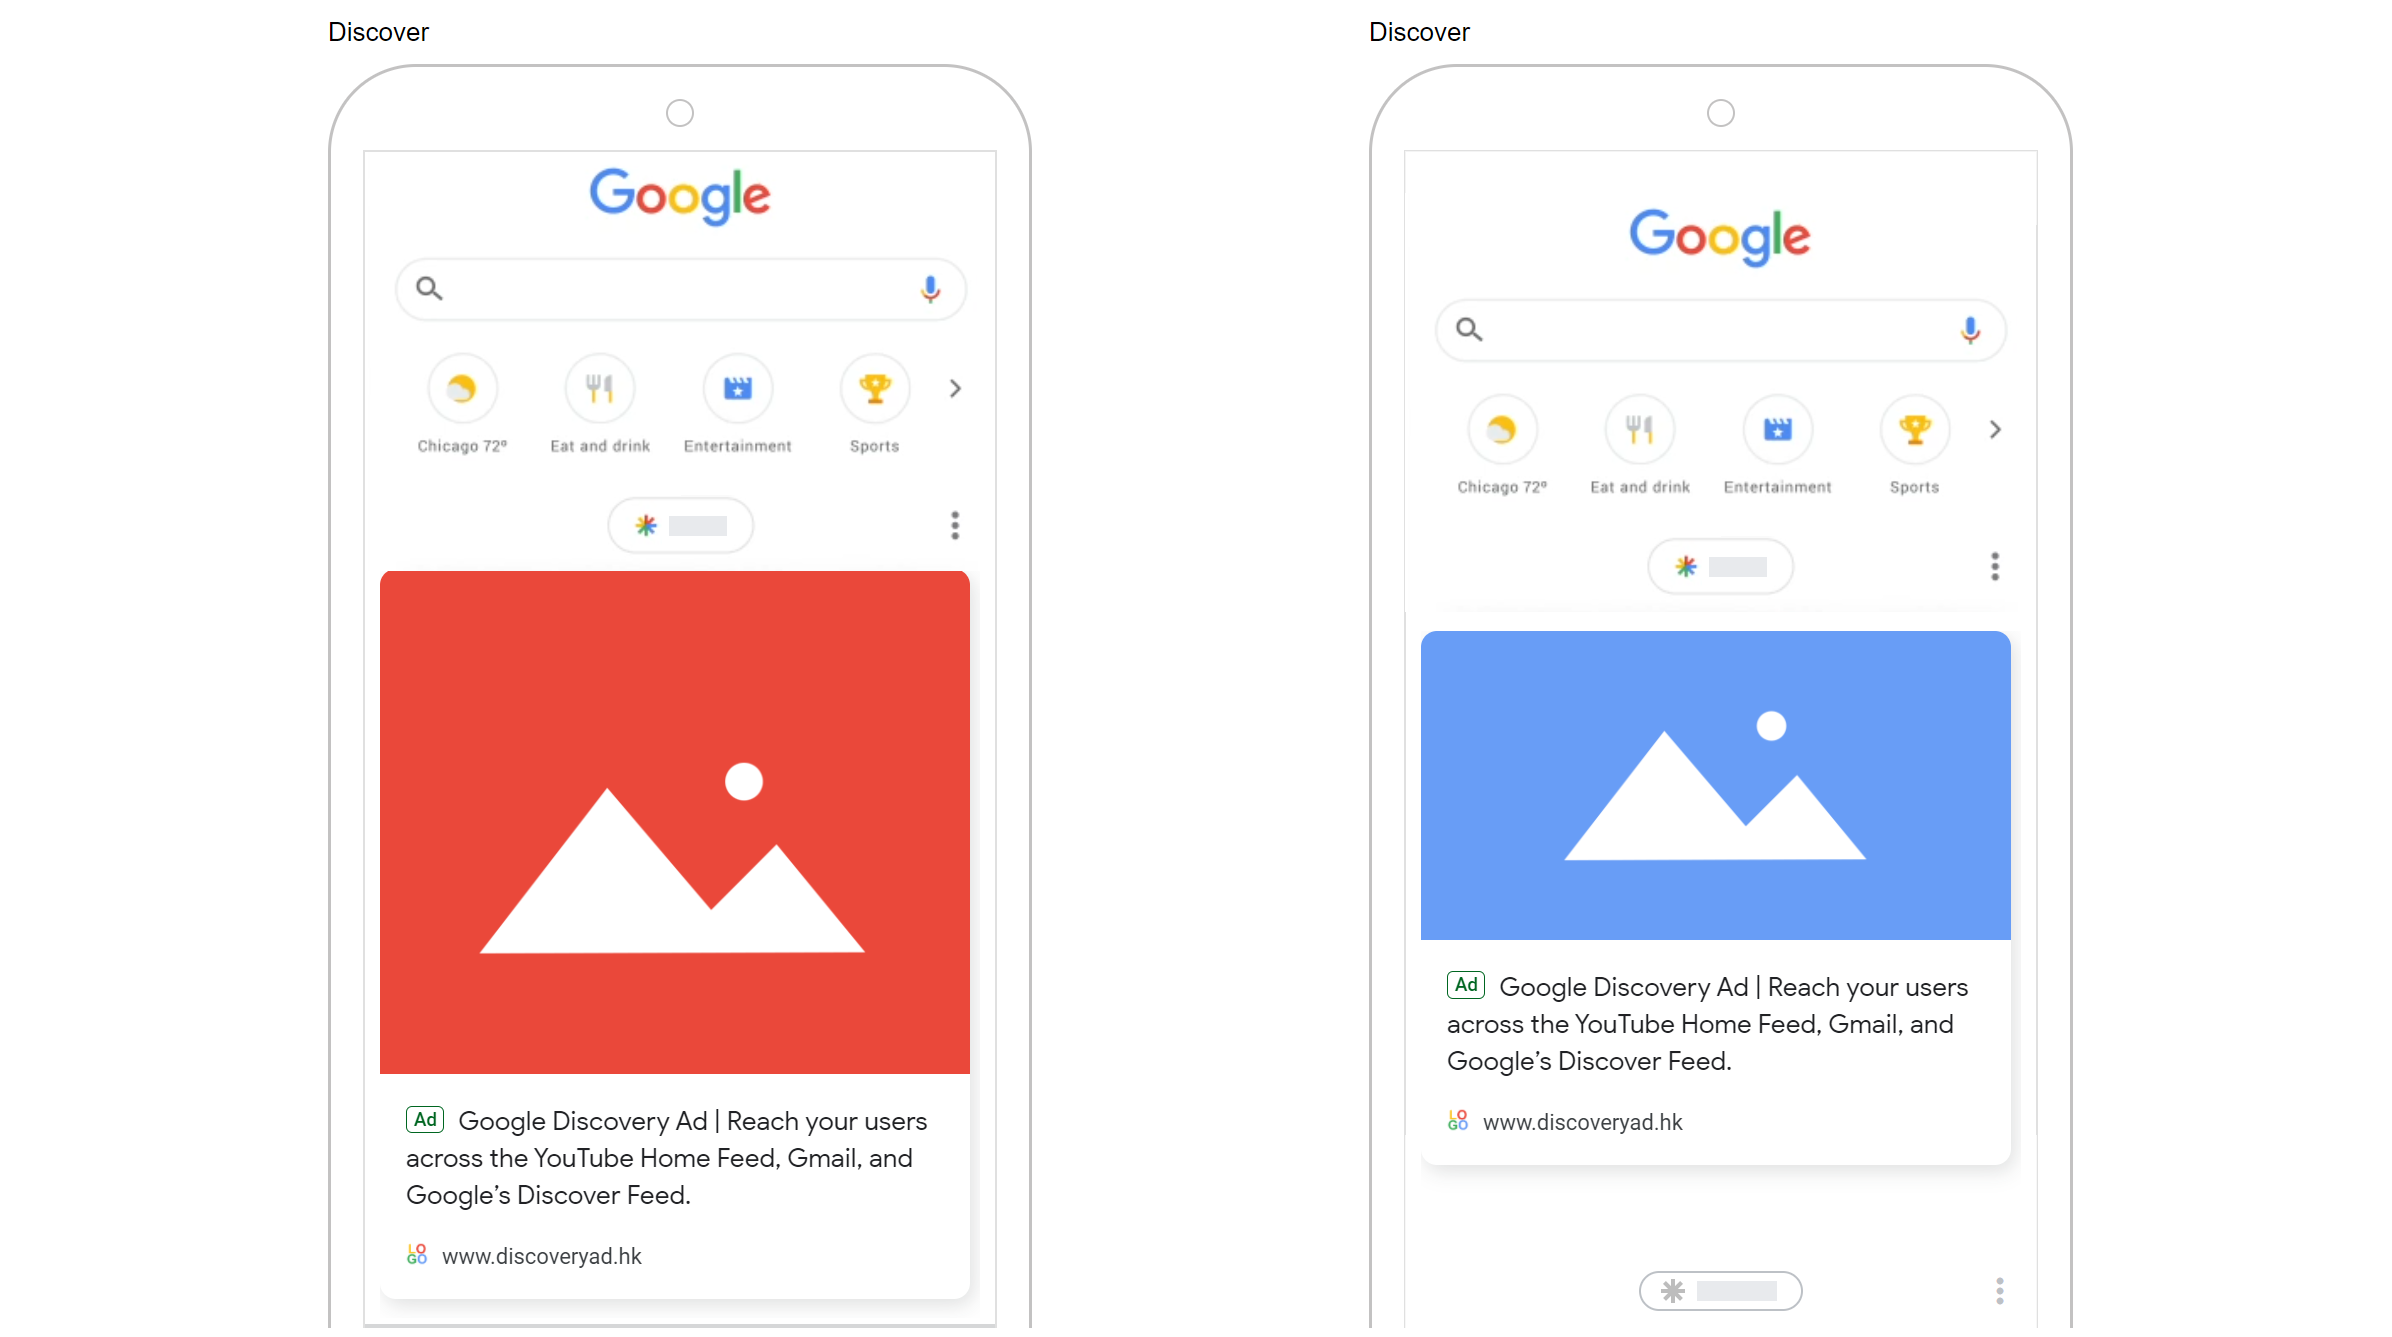 Google Discovery Ads on Google's Discover Feed